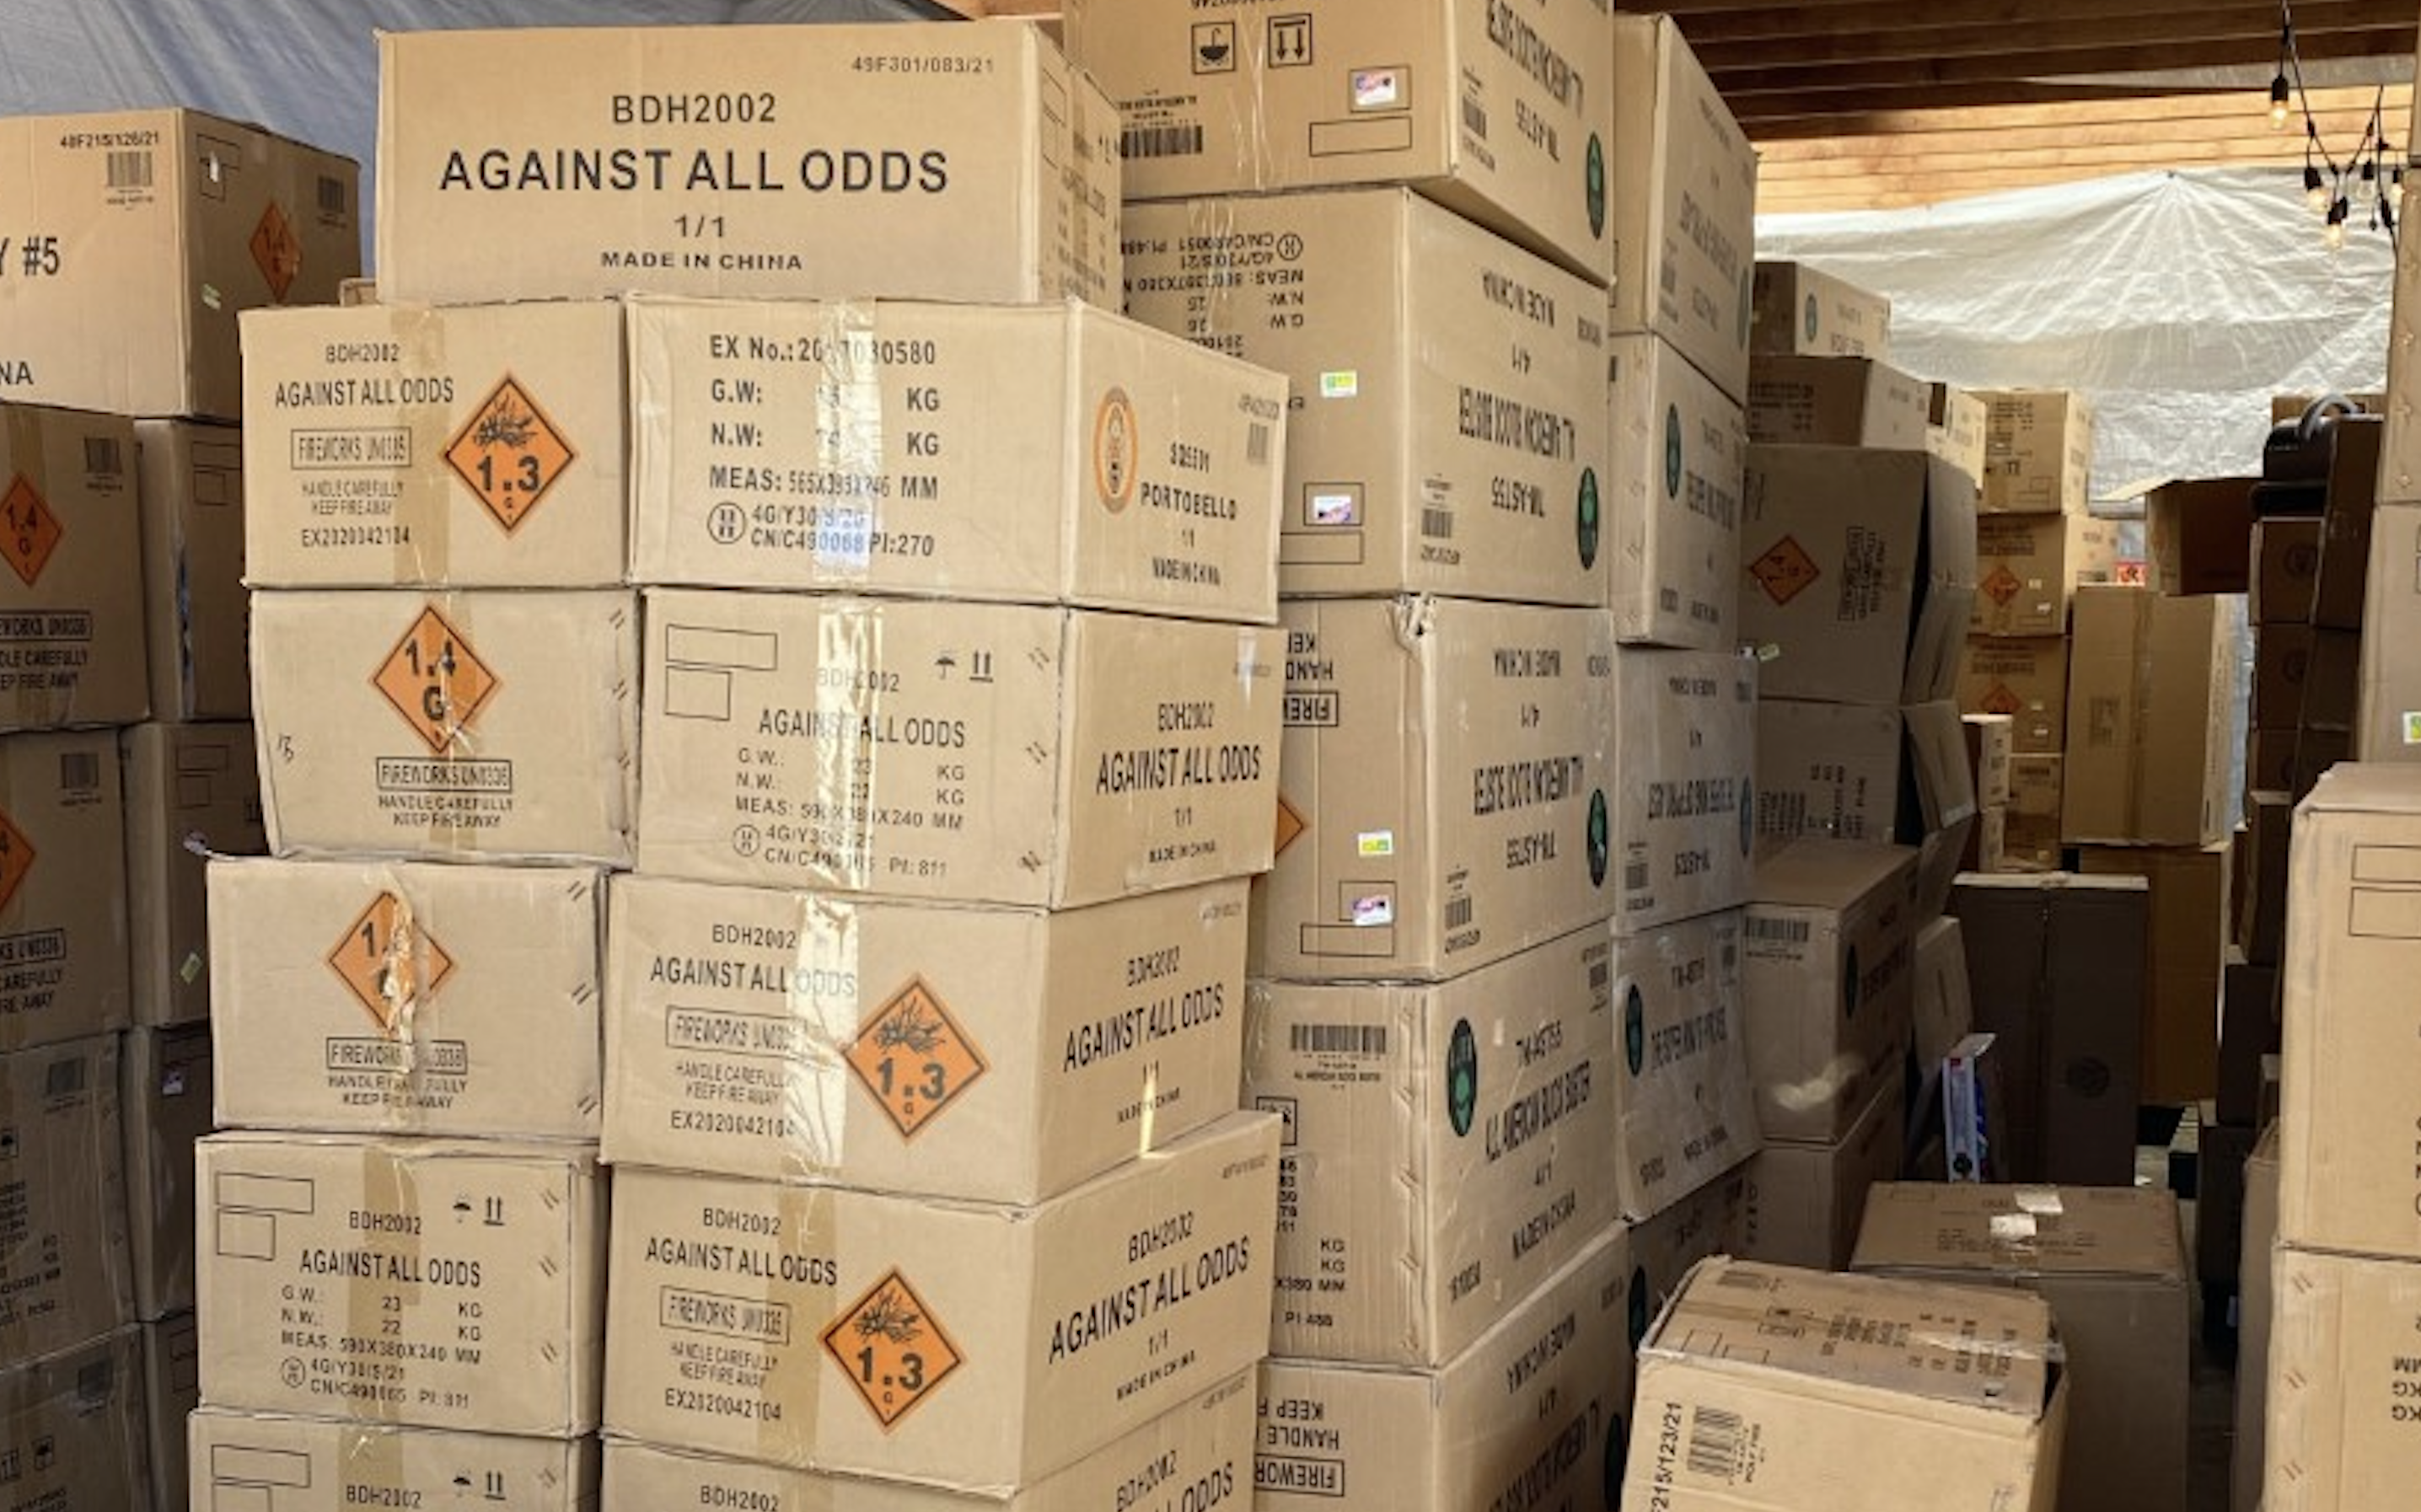 The boxes of commercial grade fireworks appear to range in weights from 13 to 29 kg/ea. LAPD said it found approximately 500 such boxes. Source: LAPD